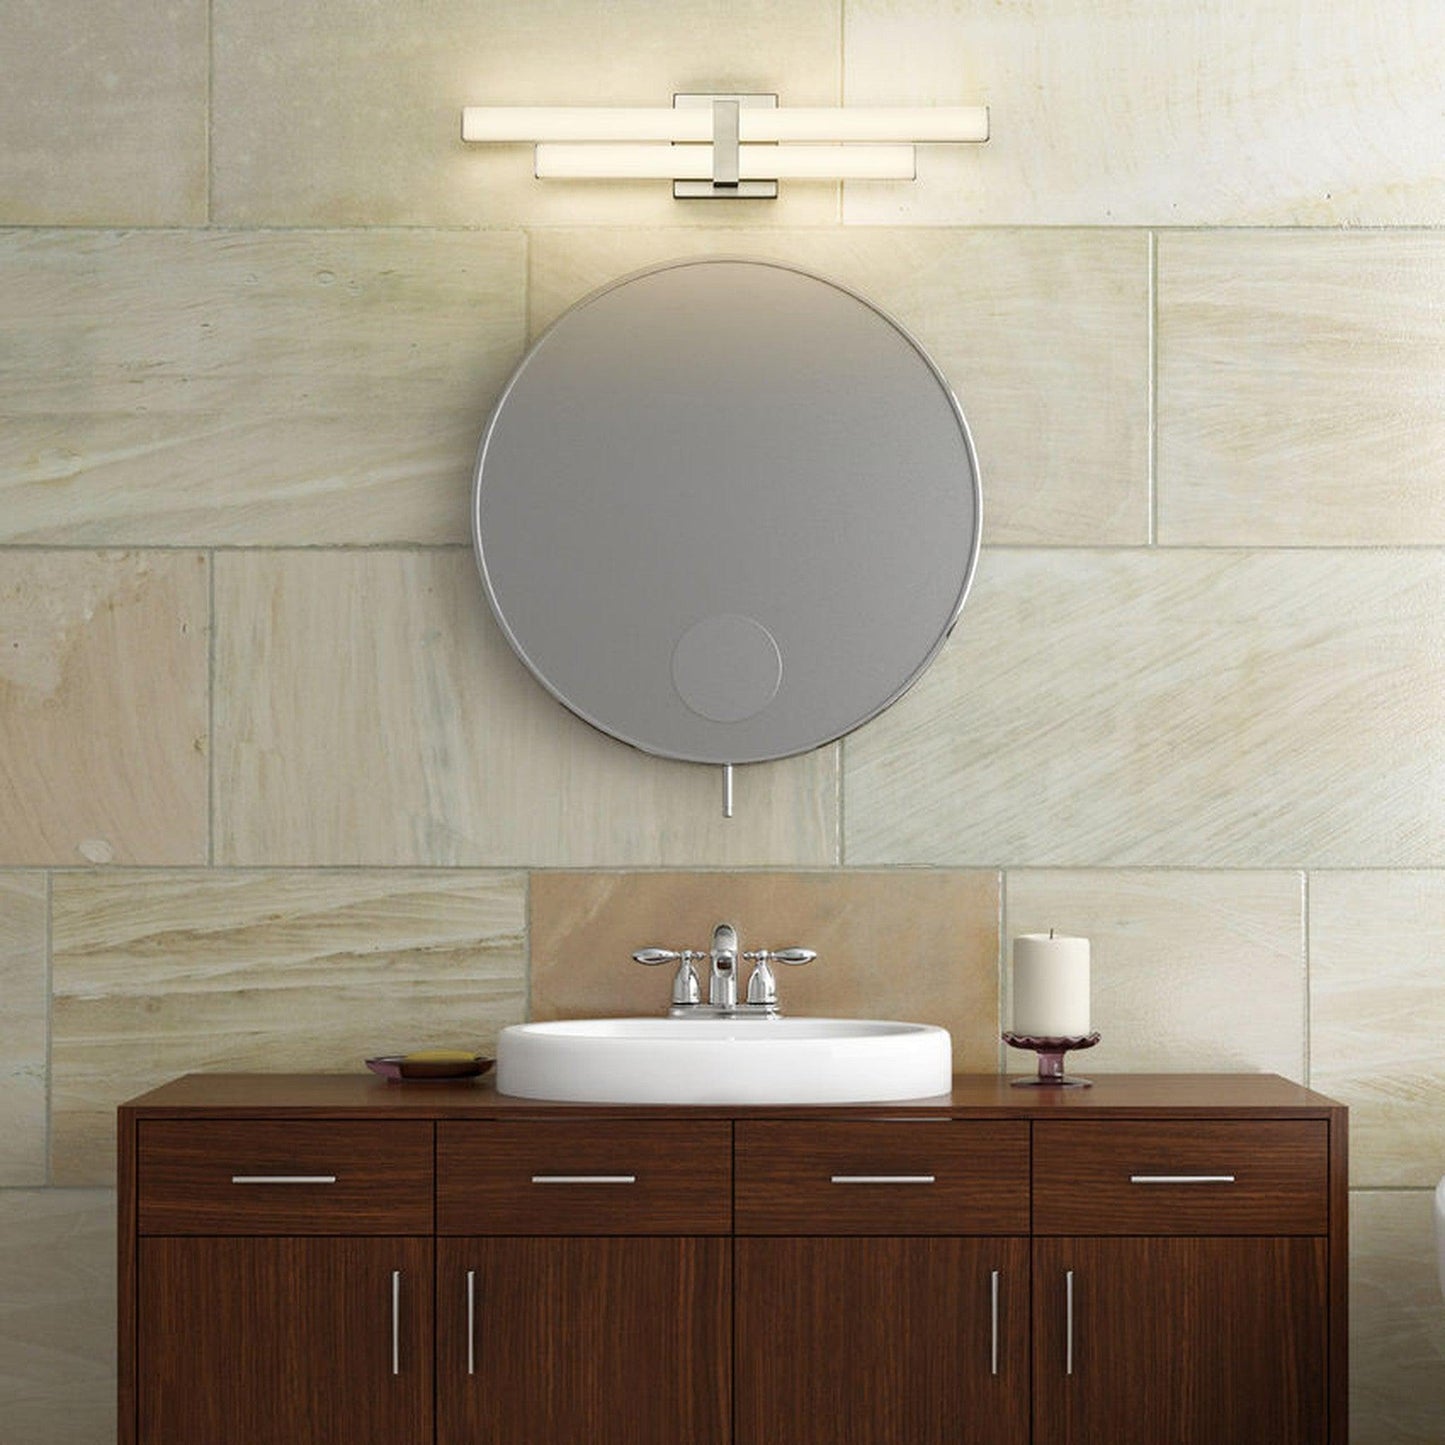 Z-Lite Zane 25" 2-Light LED Brushed Nickel and Frosted Shade Vanity Light